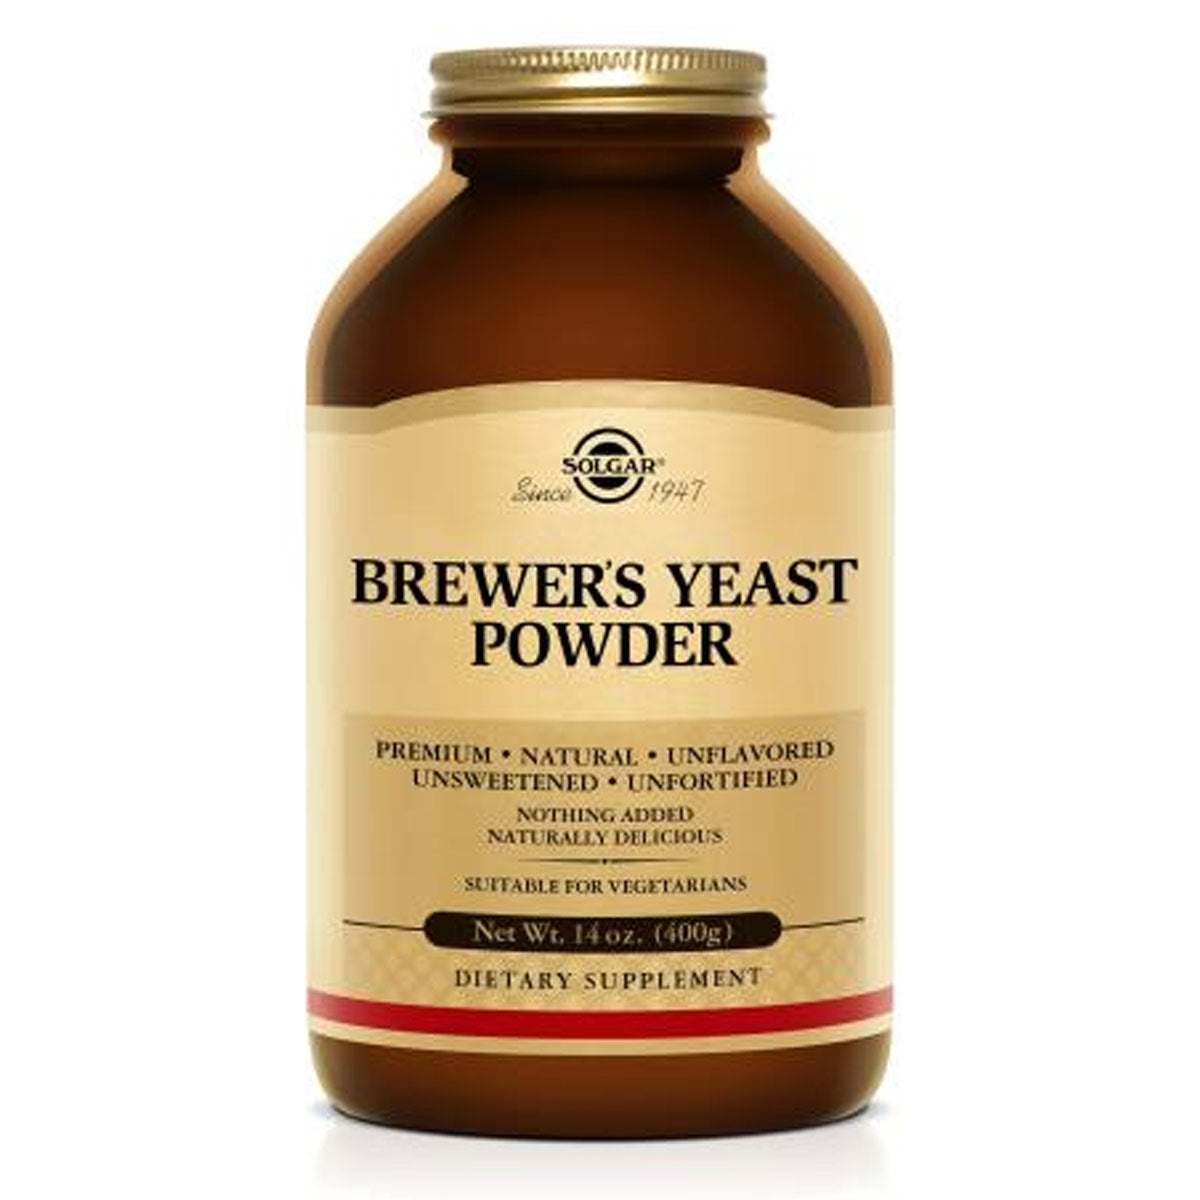 Primary image of Brewer's Yeast Powder